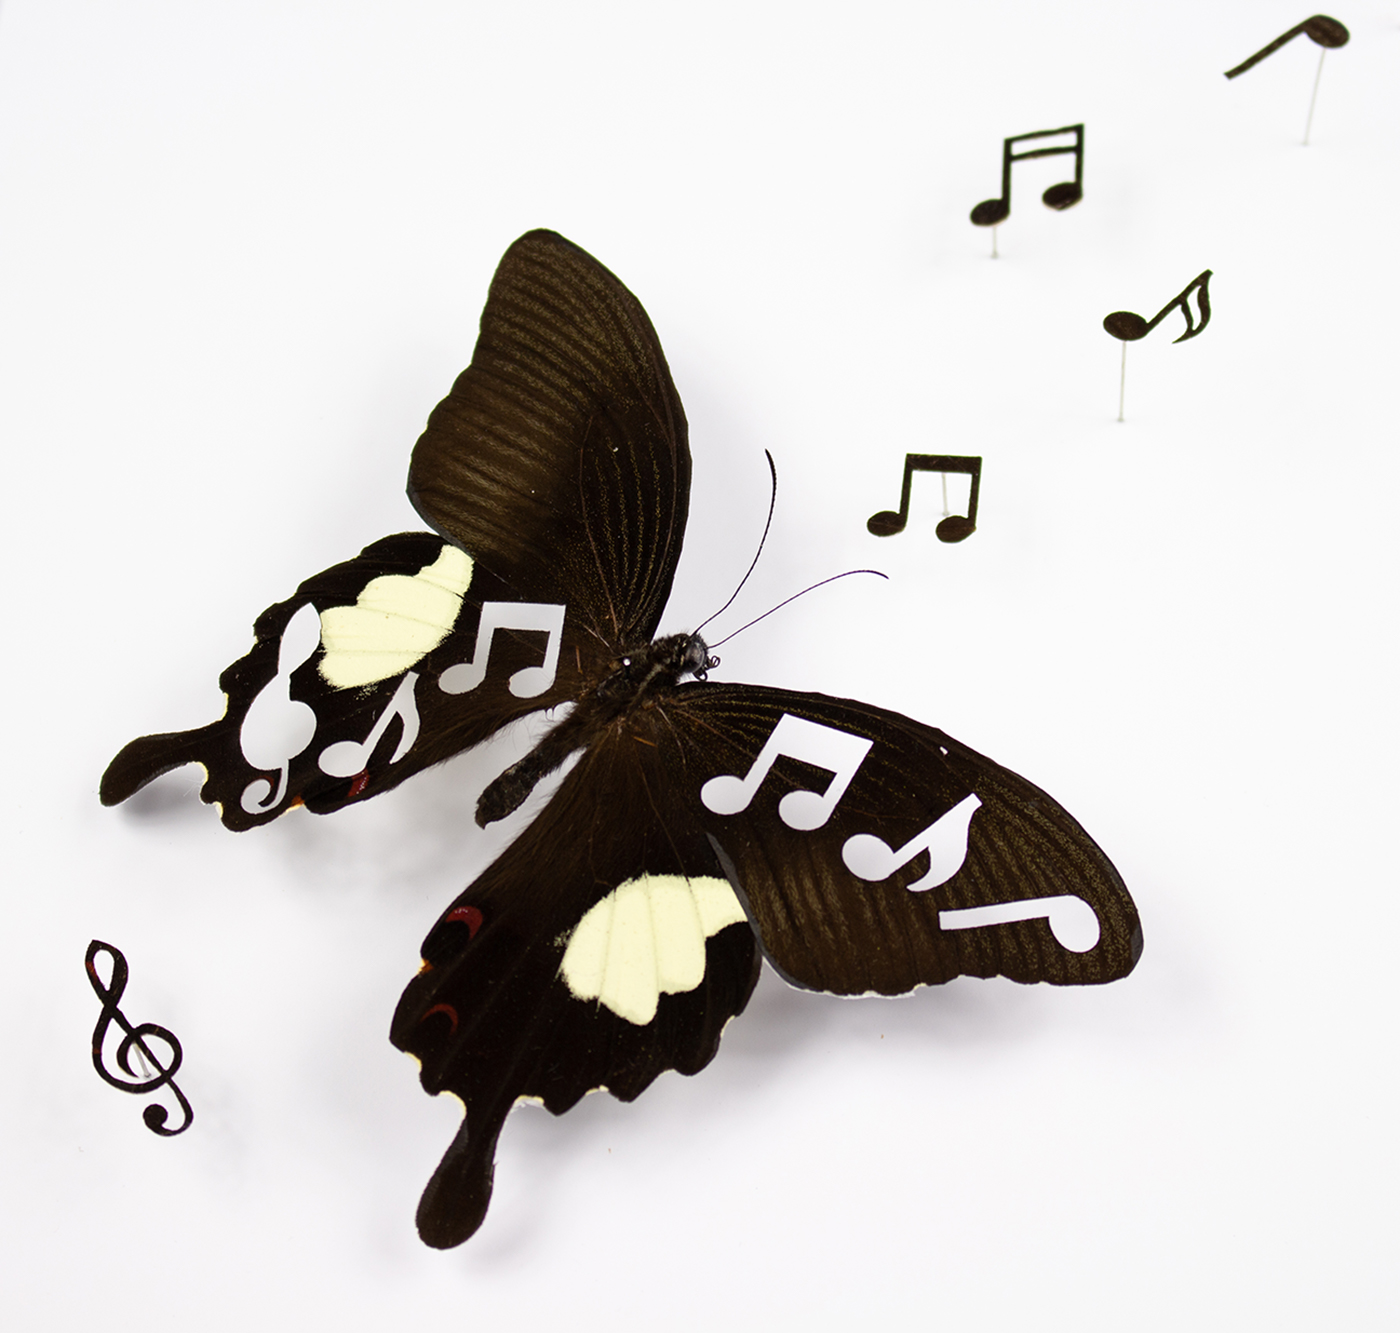 Vanitas 2, taxidermy piece featuring a black butterfly with music notes cut out